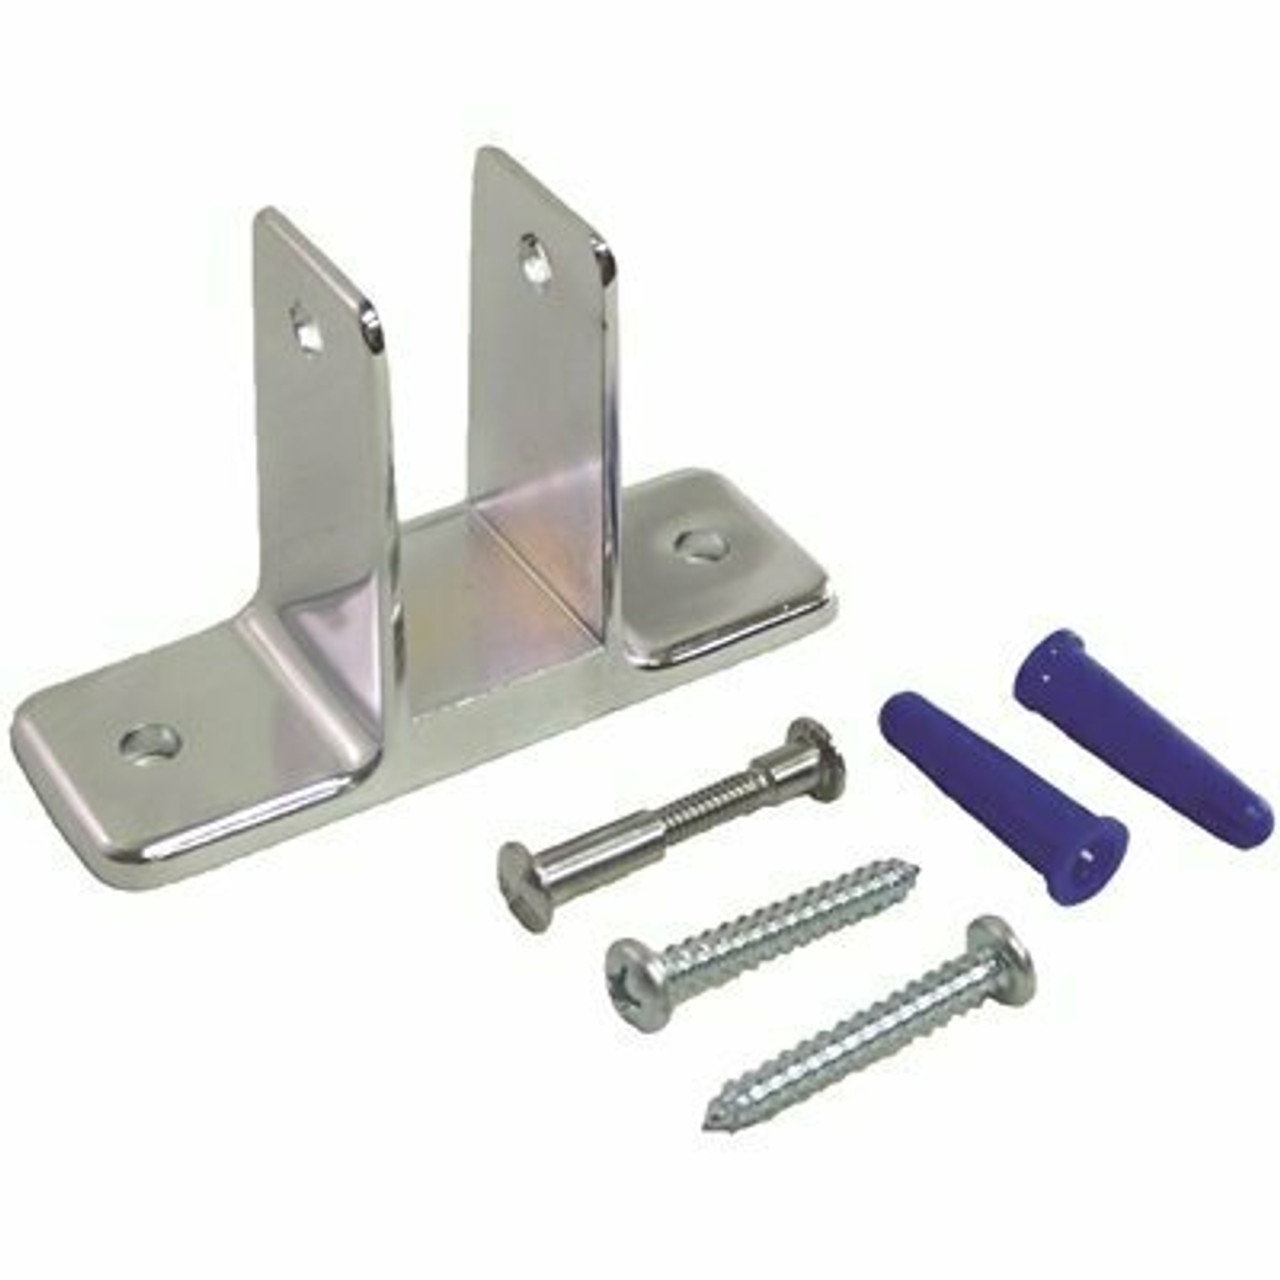 Strybuc Industries 1 In. Wall Bracket For Panel With Screws